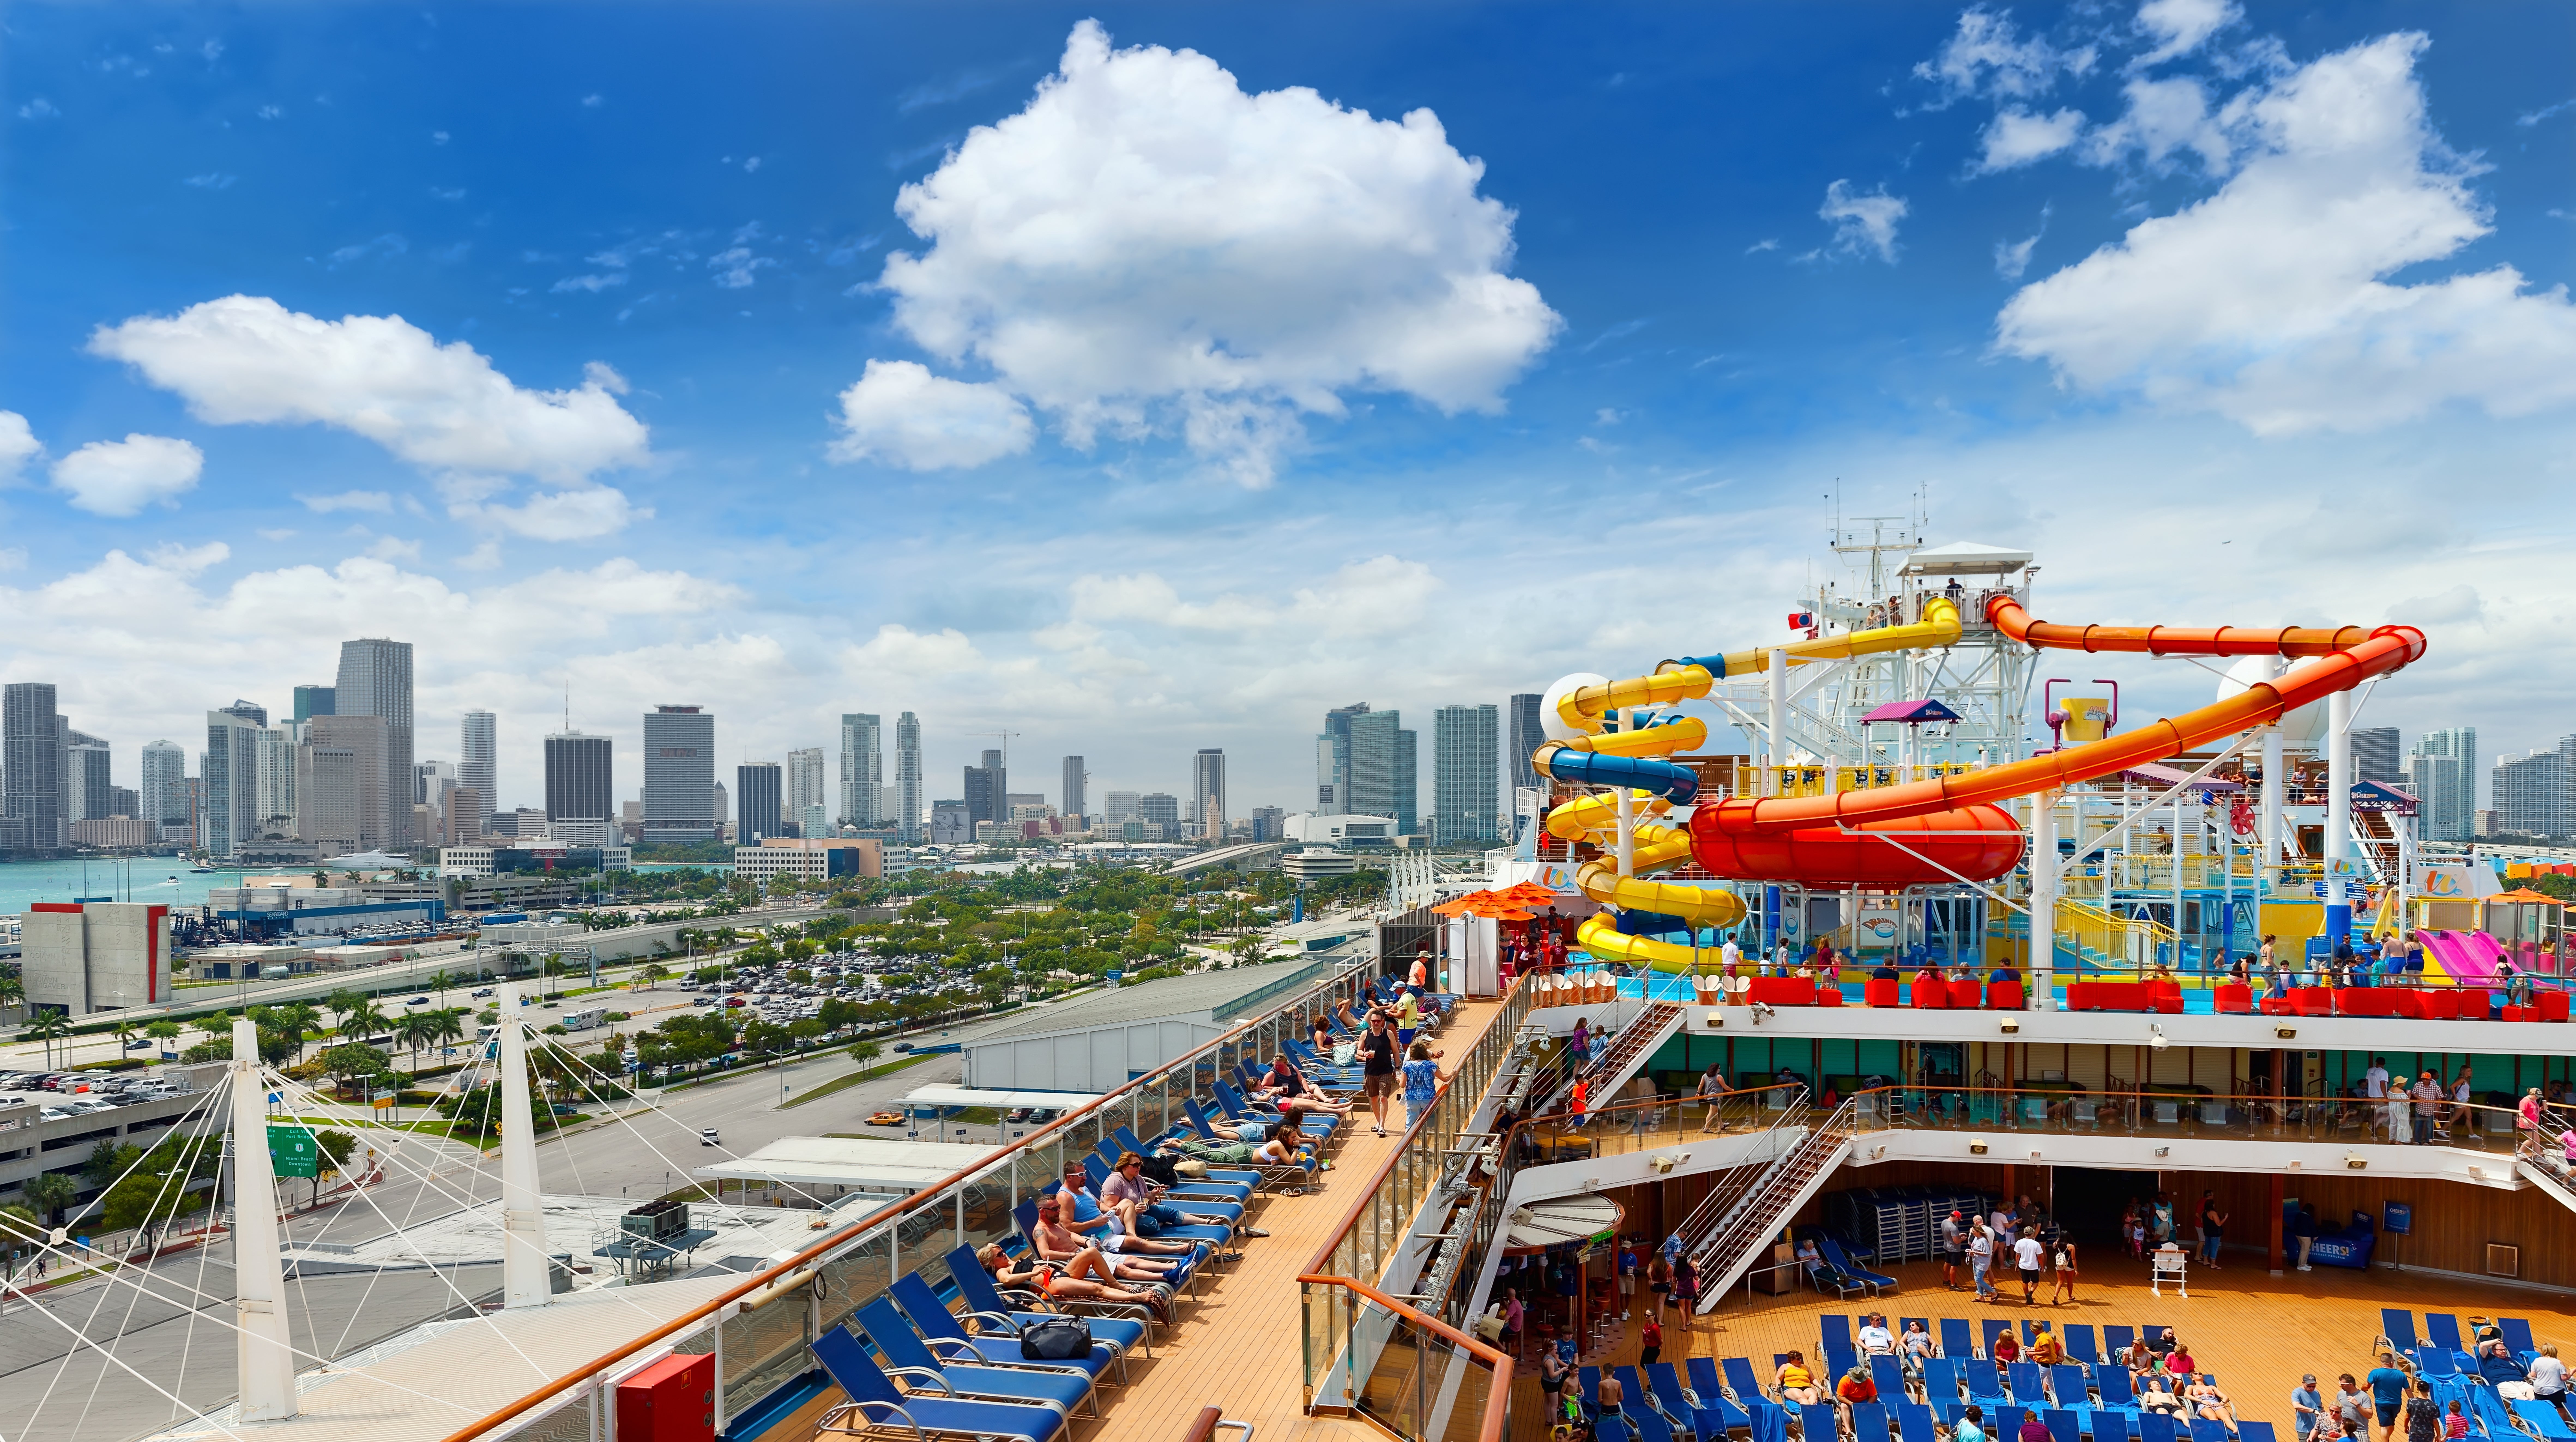 View from the Carnival Magic, departing Miami in 2019